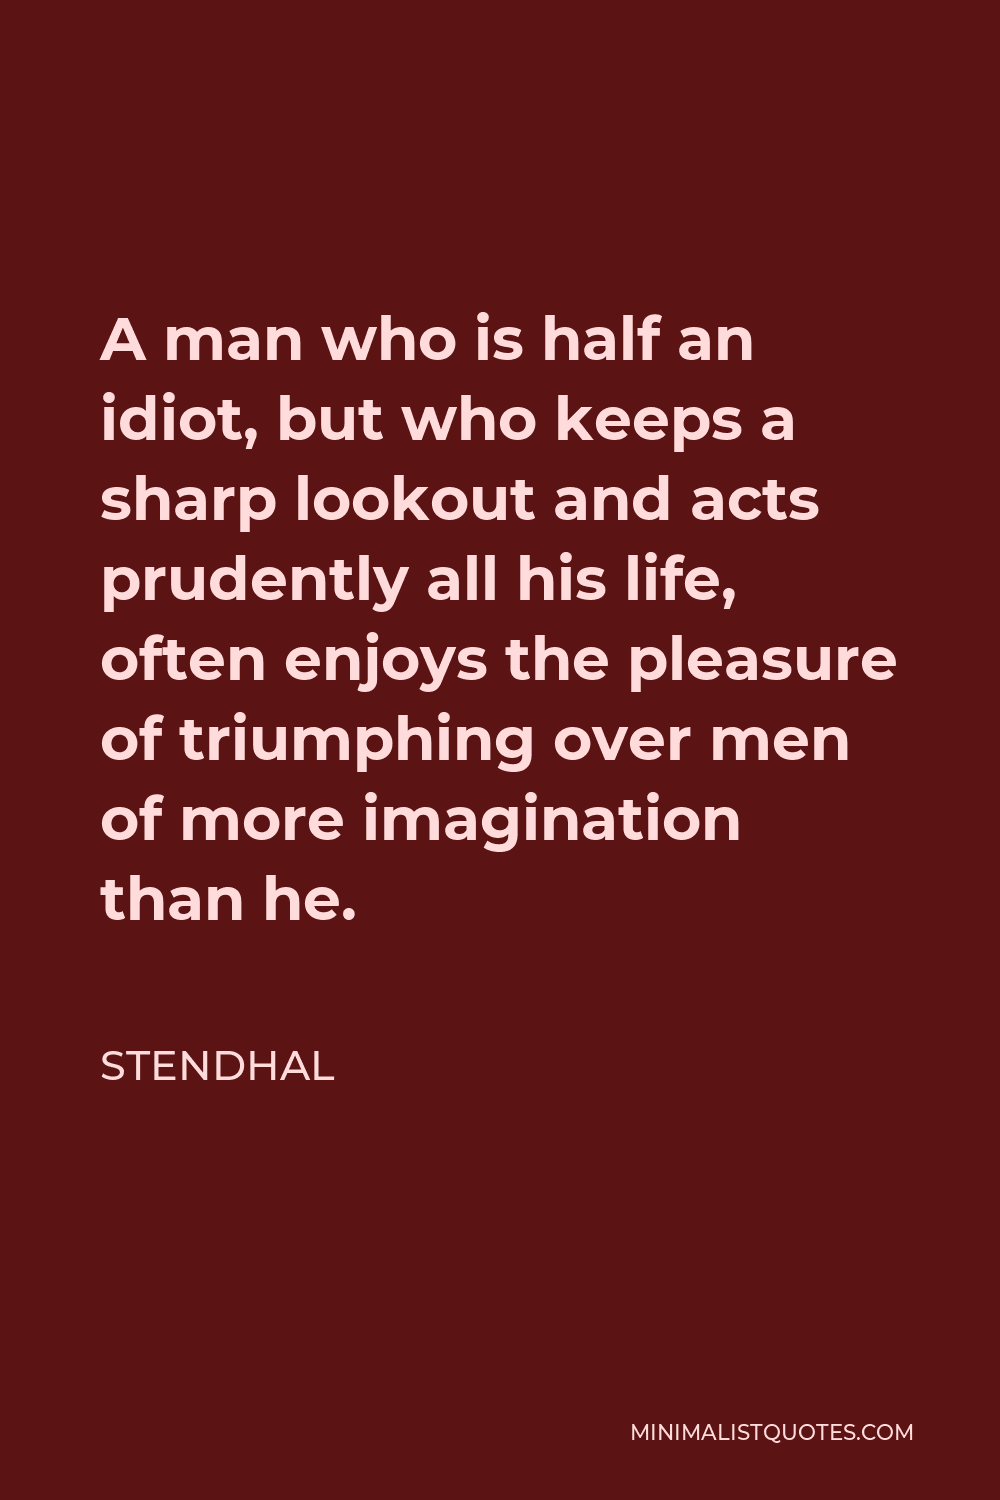 Stendhal Quote - A man who is half an idiot, but who keeps a sharp lookout and acts prudently all his life, often enjoys the pleasure of triumphing over men of more imagination than he.